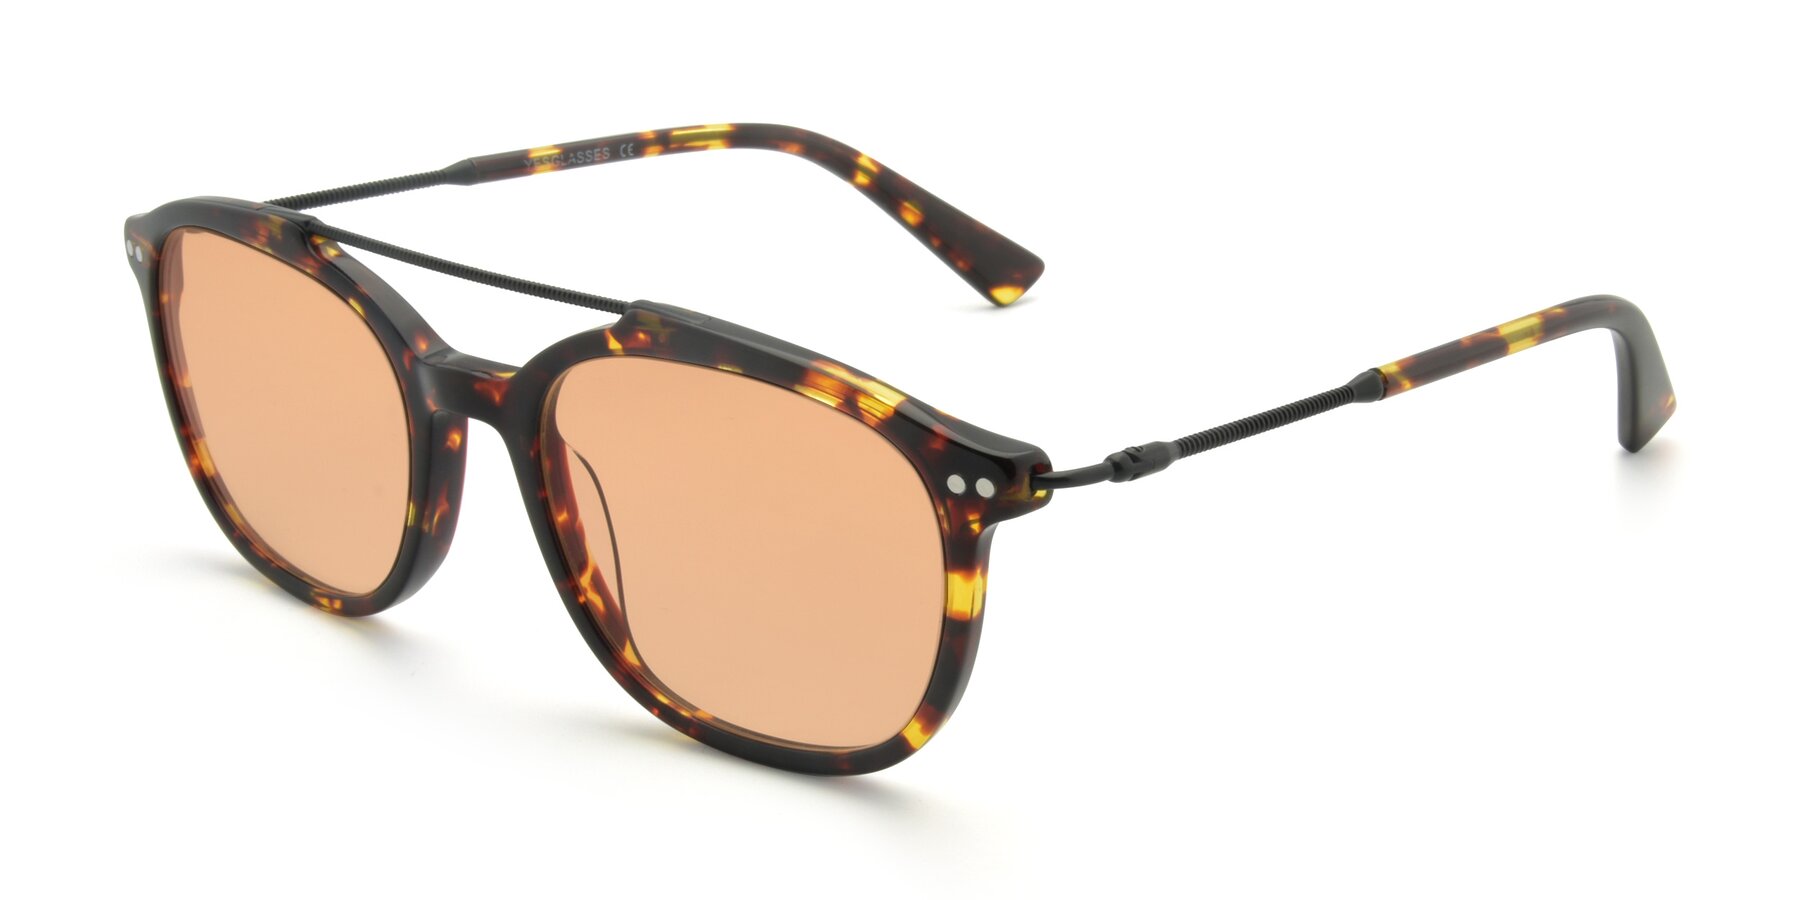 Angle of 17150 in Tortoise Brown with Light Orange Tinted Lenses